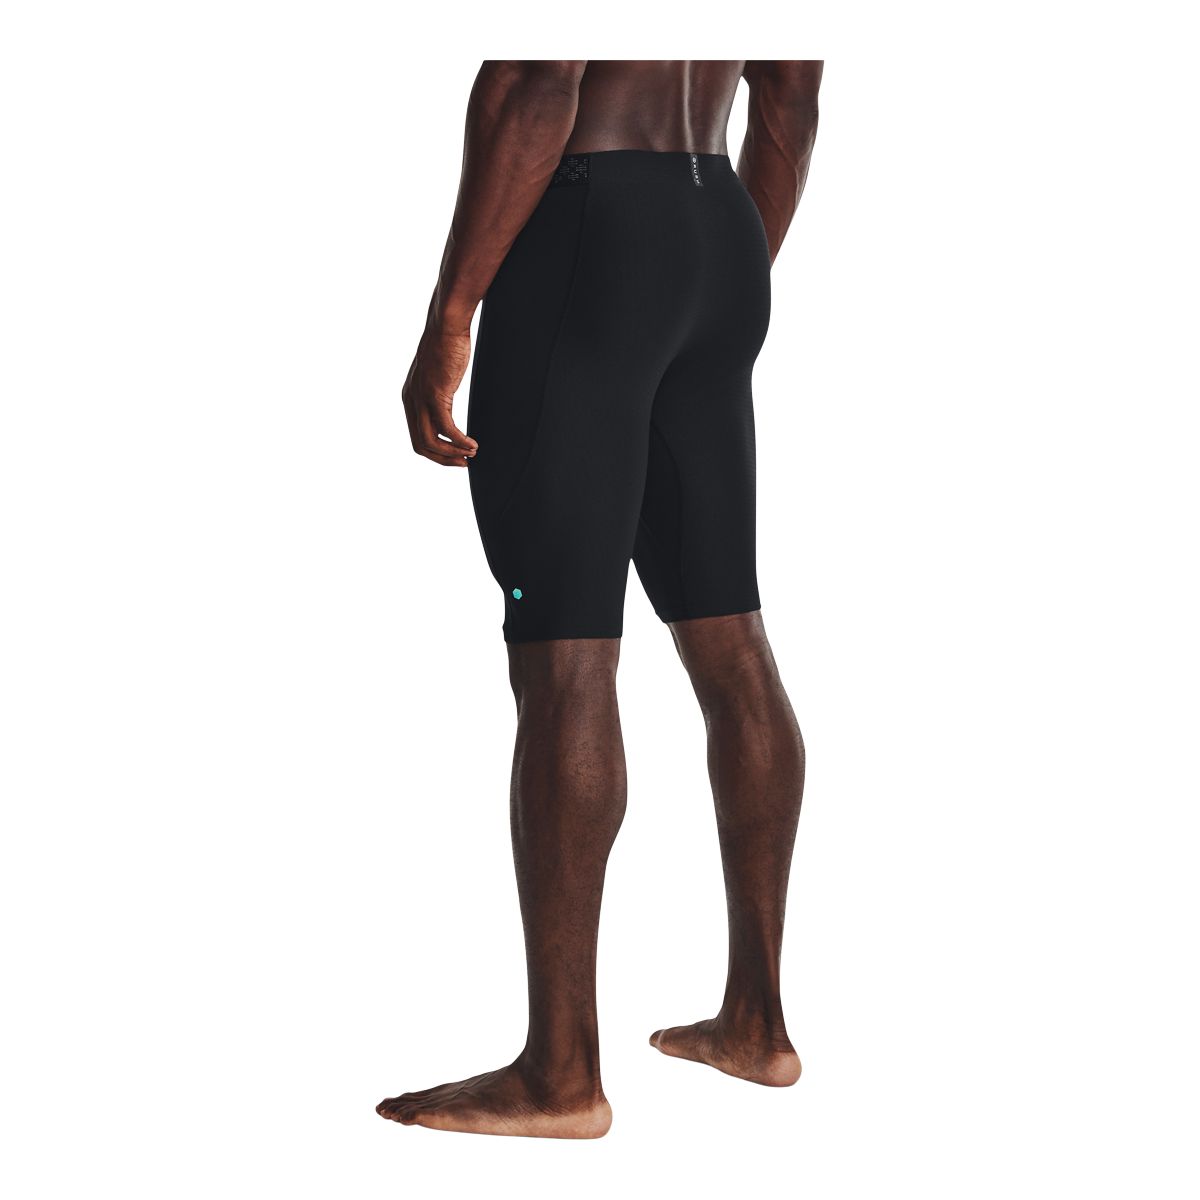 Shop Men's Athletic Compression Shorts– Thermajohn